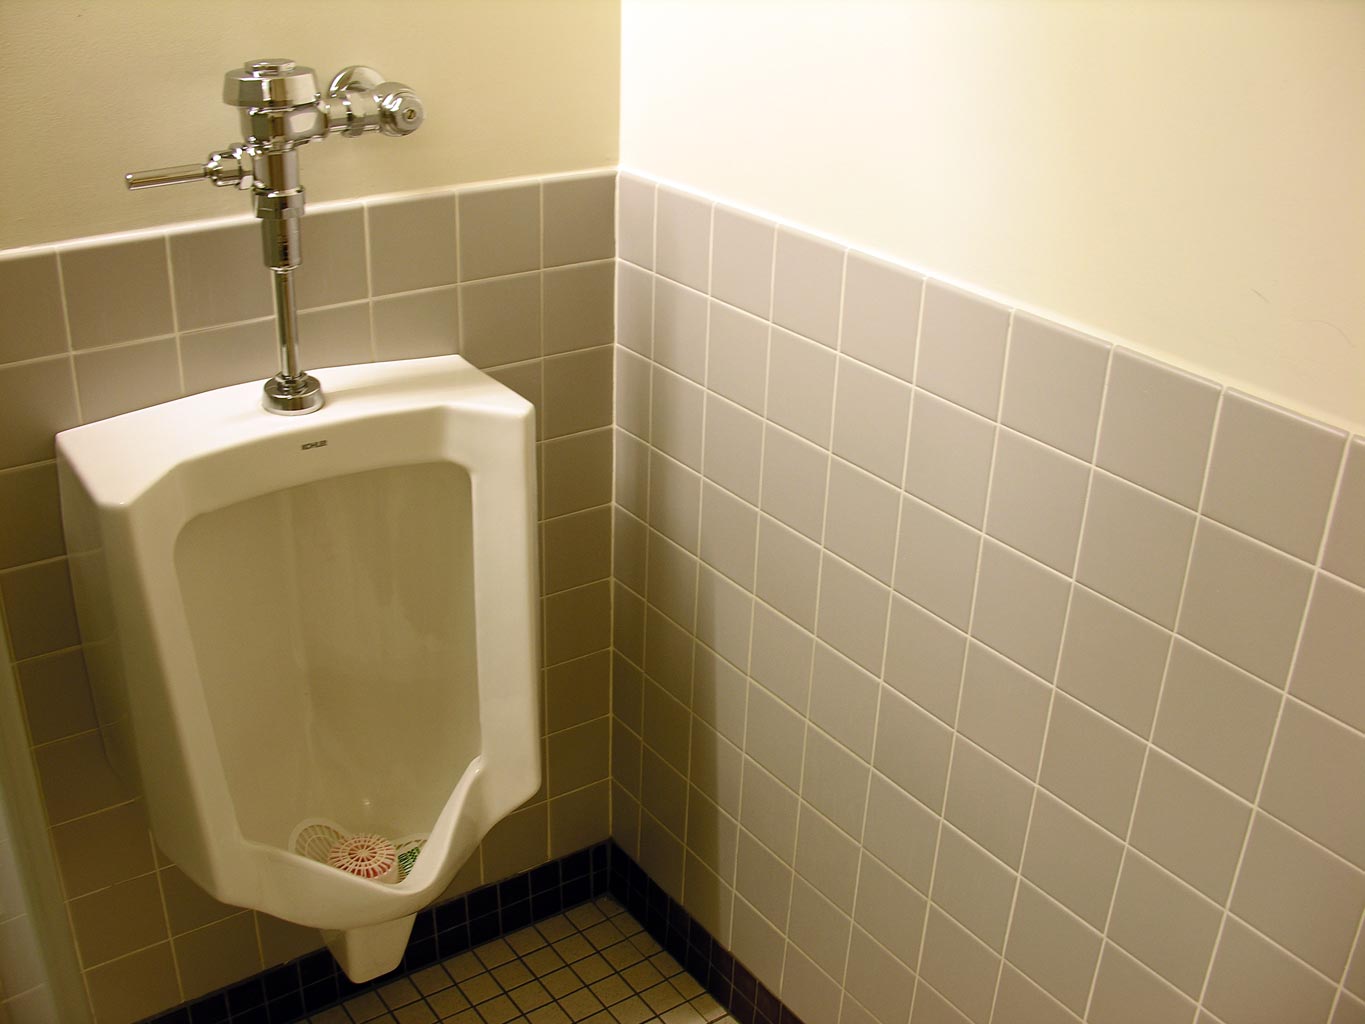 a urinal in a public restroom with no wall